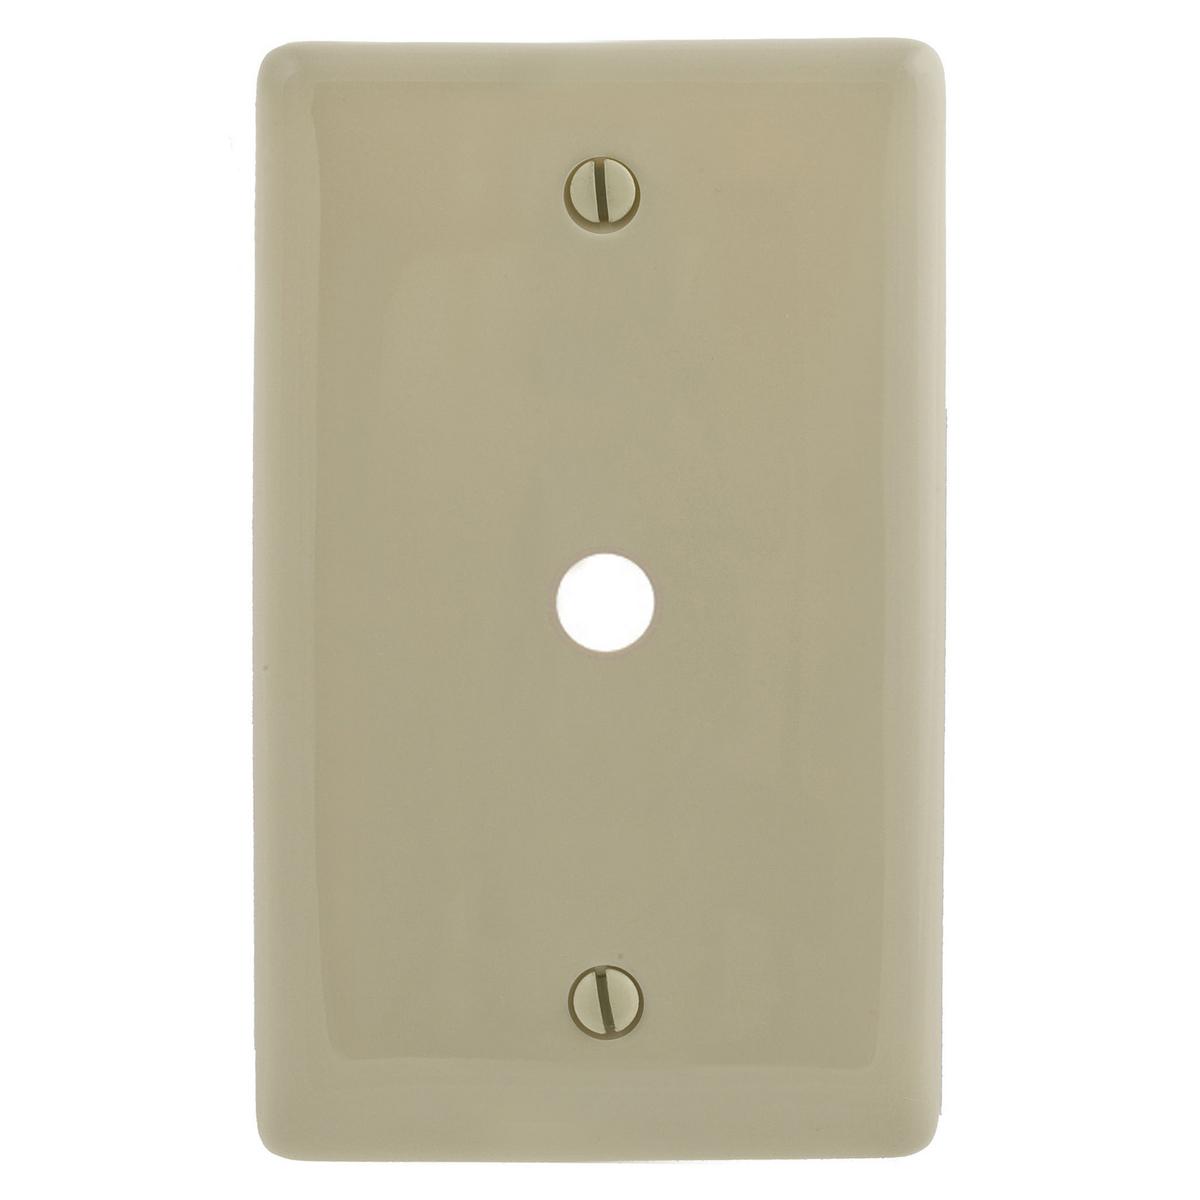 Hubbell NP11I Wallplates and Box Covers, Wallplate, Nylon, 1-Gang, .406" Opening, Box Mount, Ivory  ; Reinforcement ribs for extra strength ; High-impact, self-extinguishing nylon material ; Captive screw feature holds mounting screw in place ; Standard Size is 1/8" la